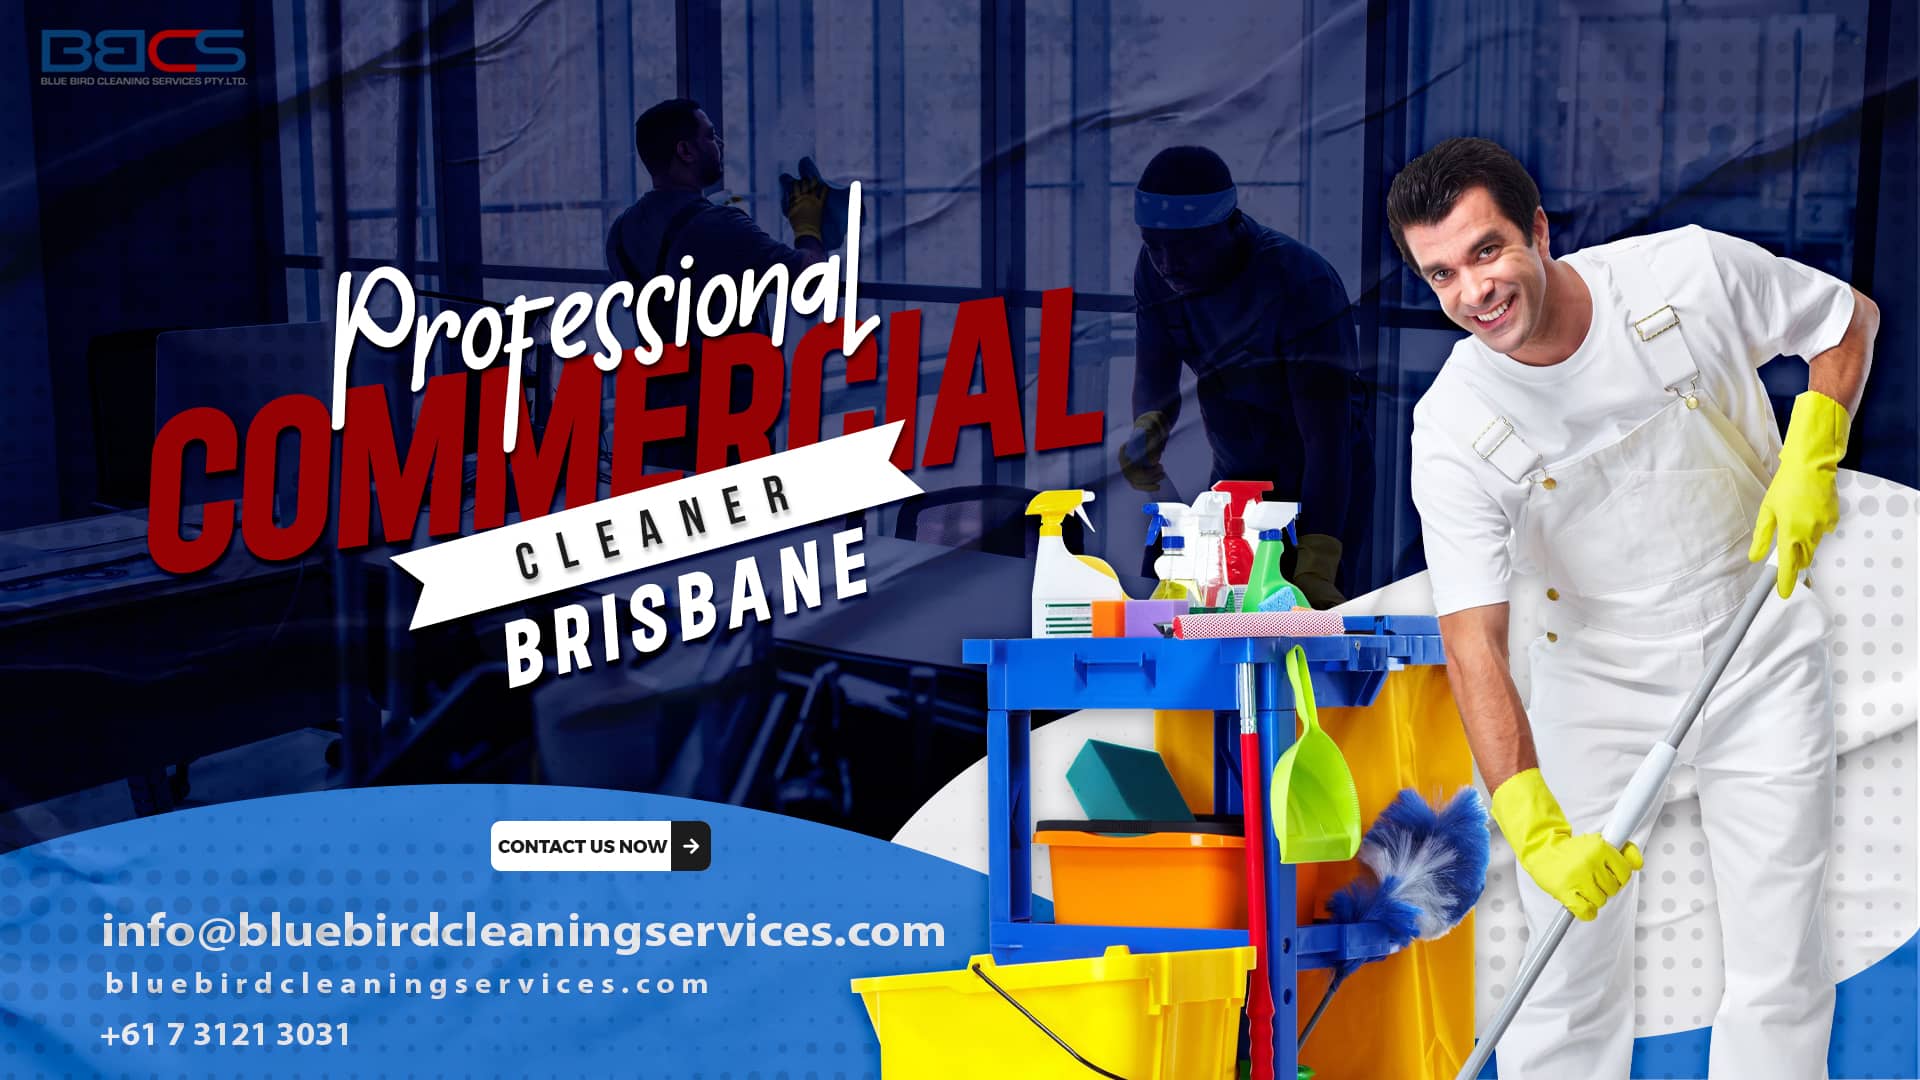 Professional Commercial Cleaner- Quality Cleaning at Your Office